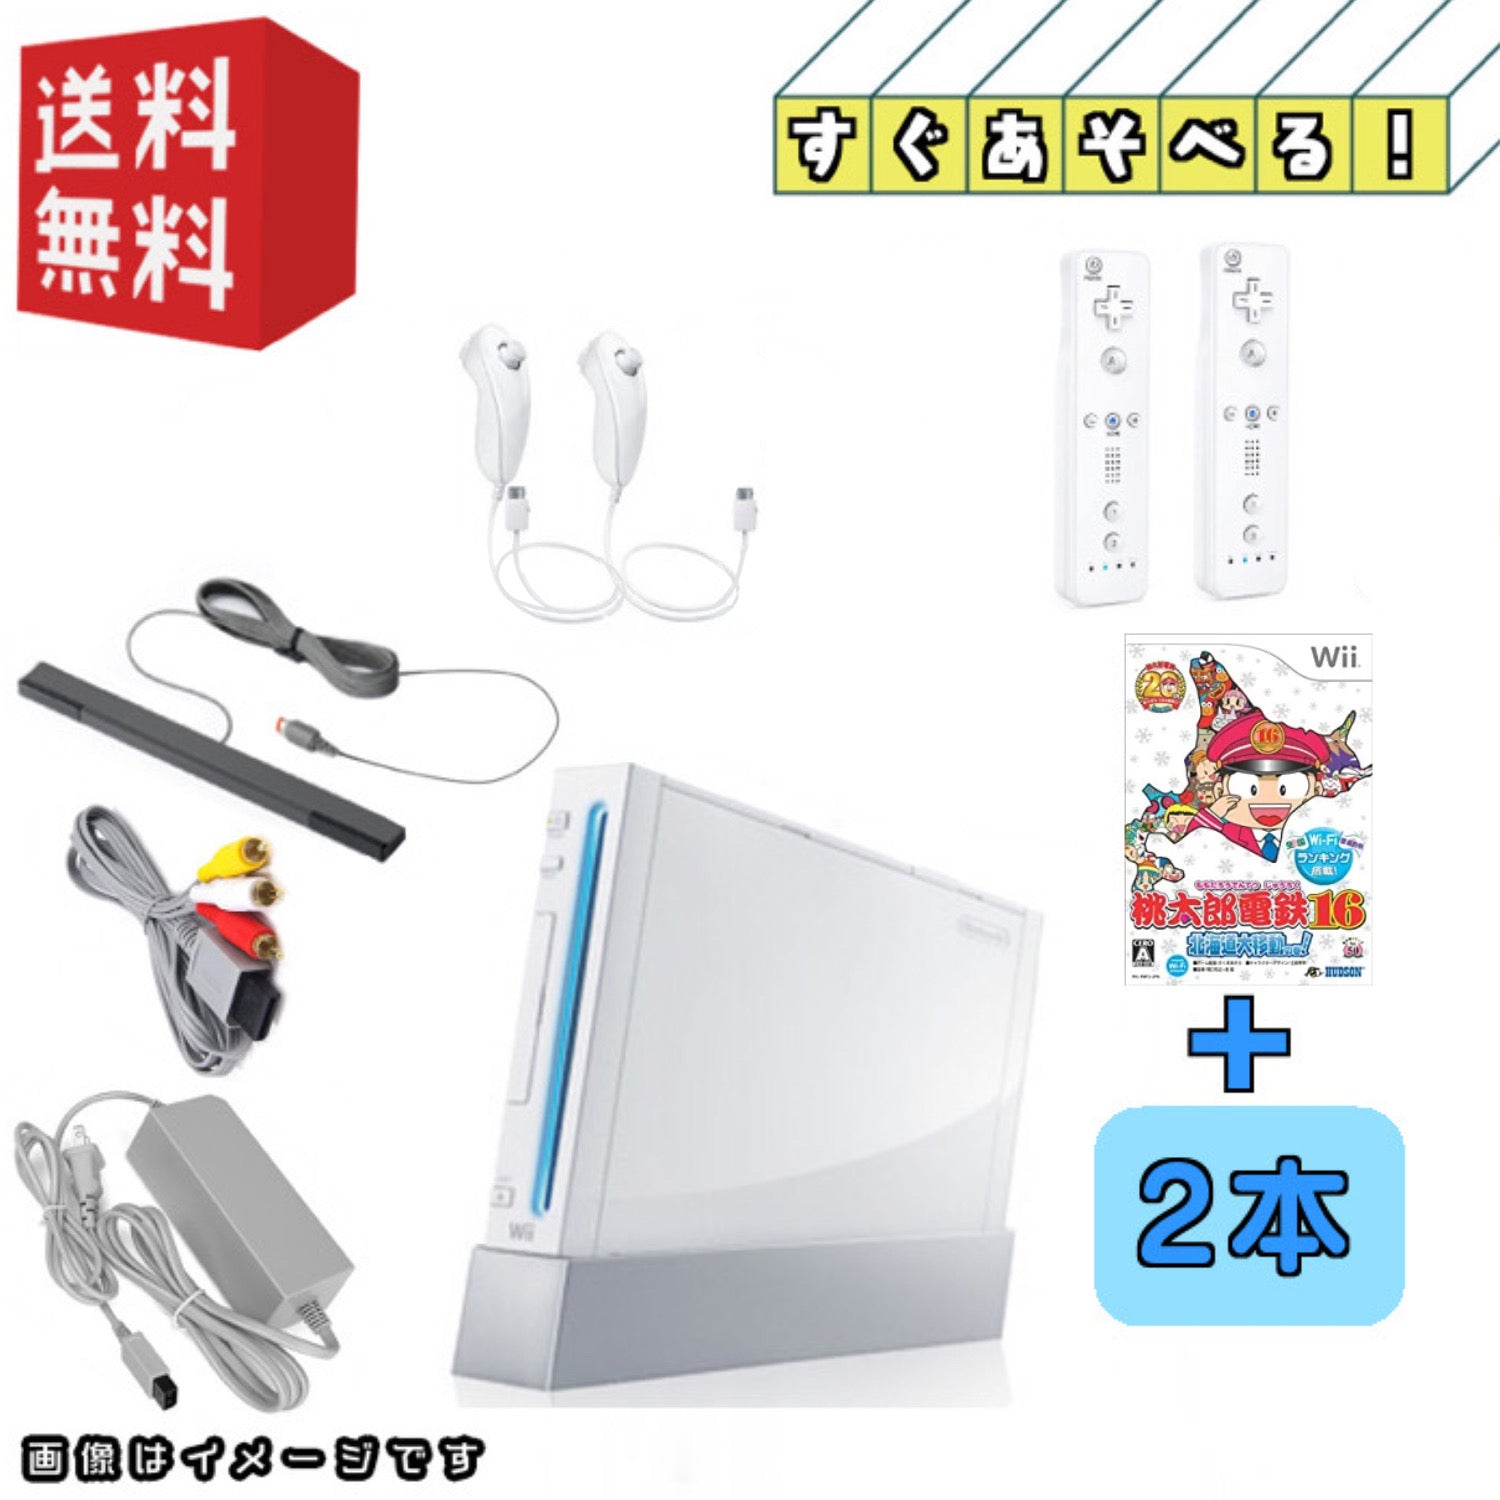 Wii 本体+ソフト+リモコン2個